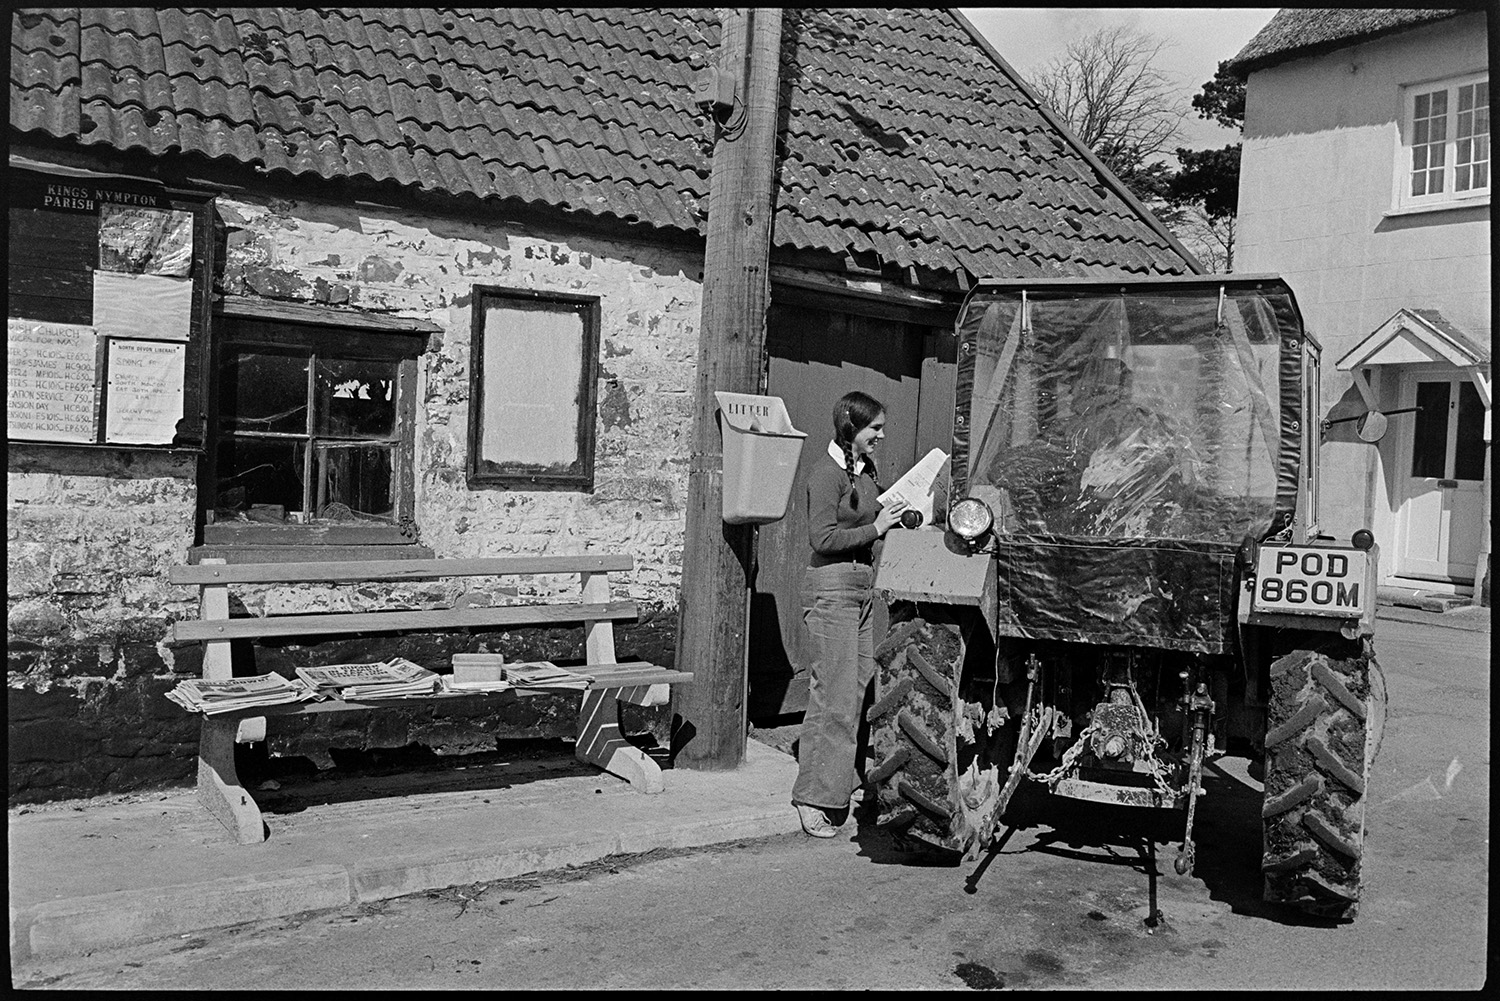 Sunday papers being sold in village, farmer in tractor and people chatting. 
[A girl selling Sunday newspapers in Kings Nympton to a person in a tractor. The newspapers are laid out on a bench. A noticeboard is attached to a building in the background.]